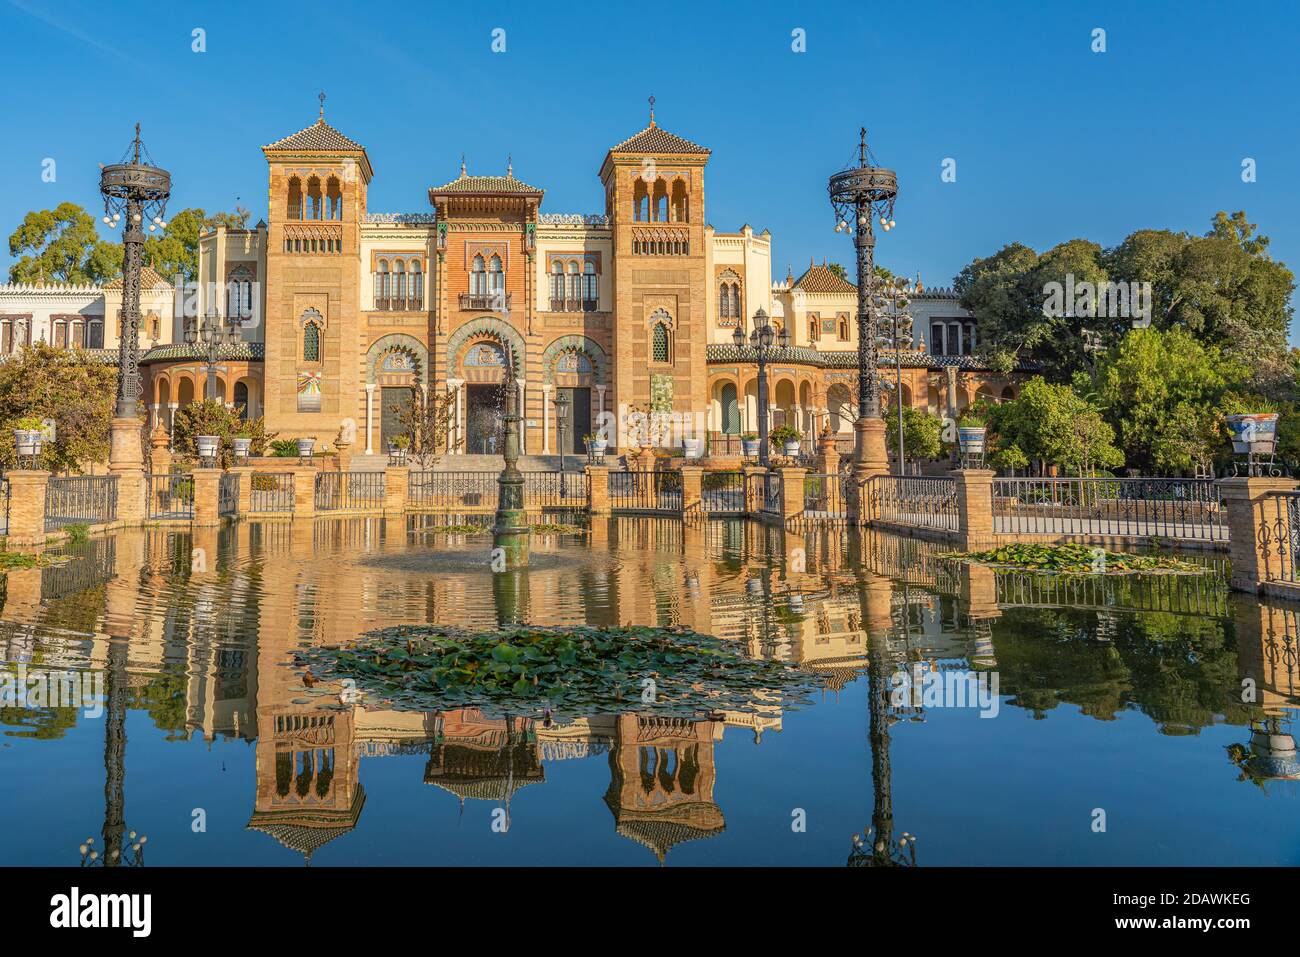 The Plaza de America and the Museum of Popular Arts in Seville, Andalusia, Spain It is located in the Parque de Maria Luisa. Stock Photo